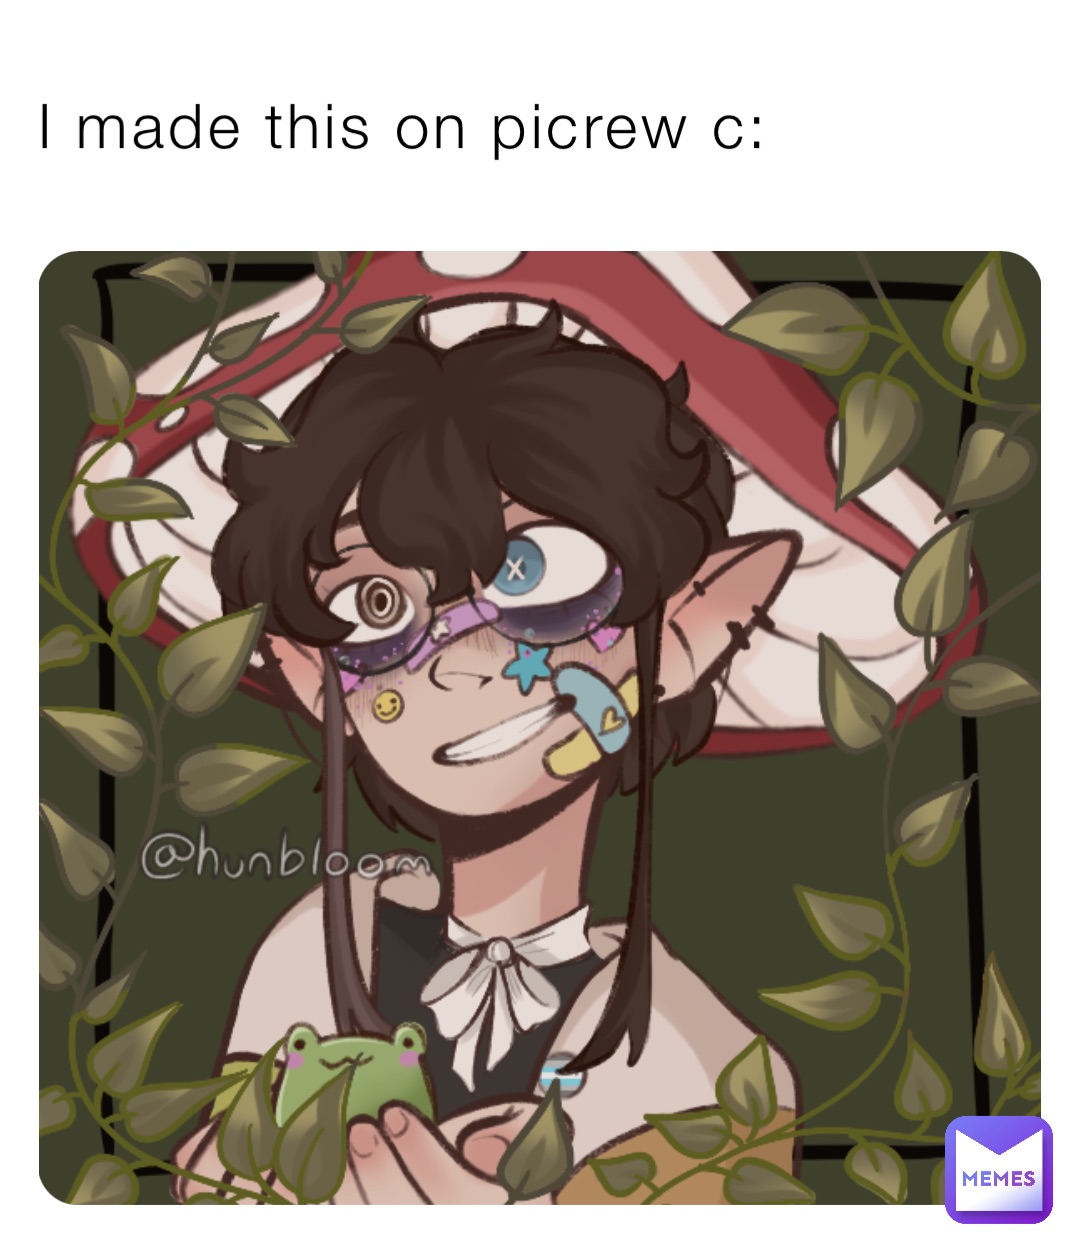 I made this on picrew c: